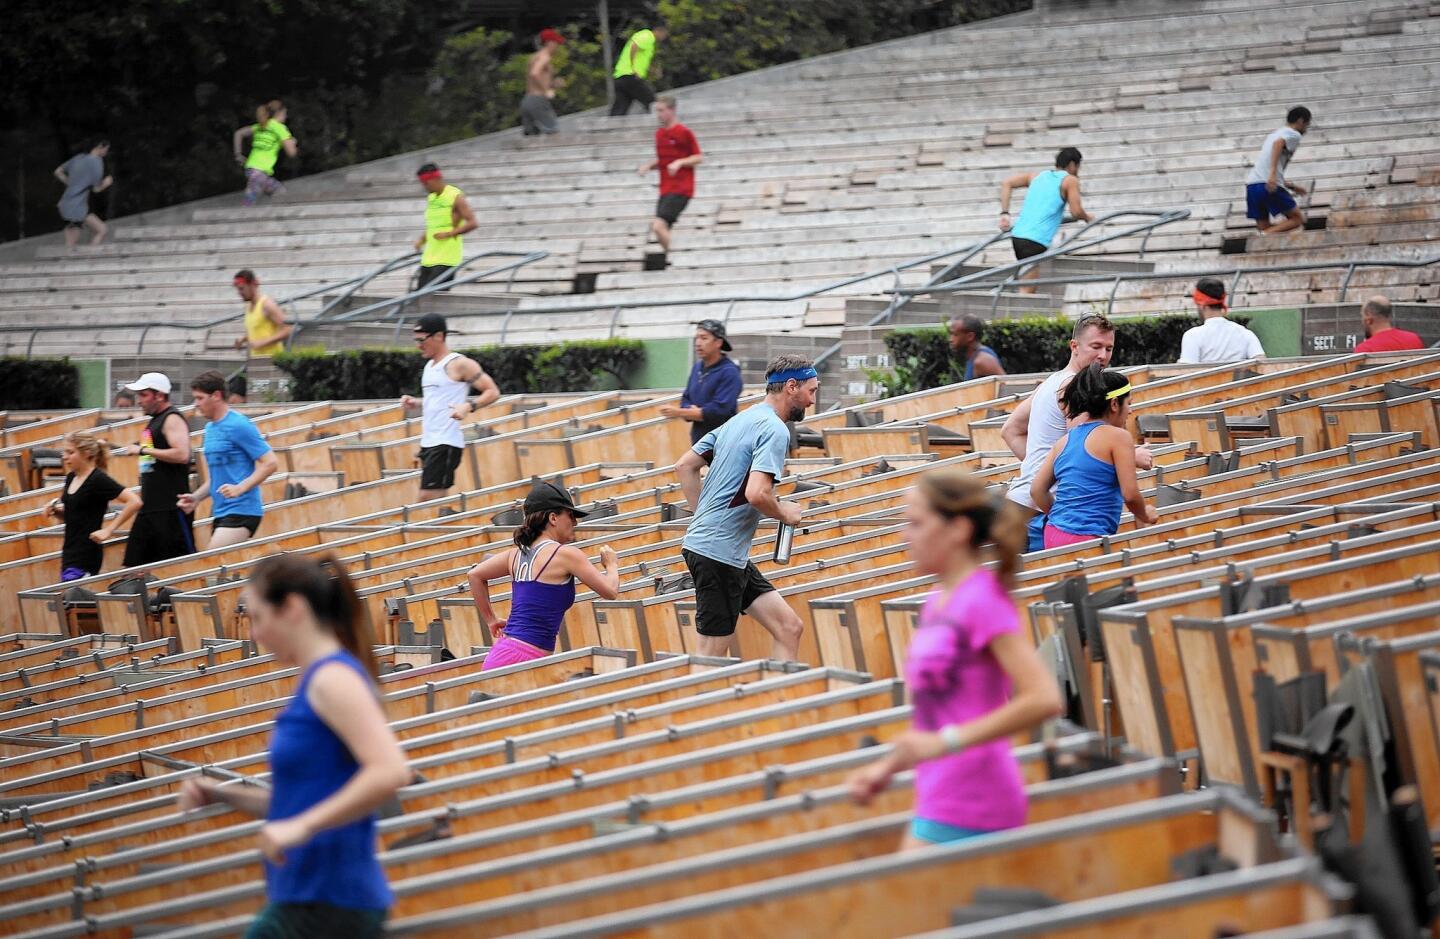 November Project is a free running workout that uses the steps of the Hollywood Bowl